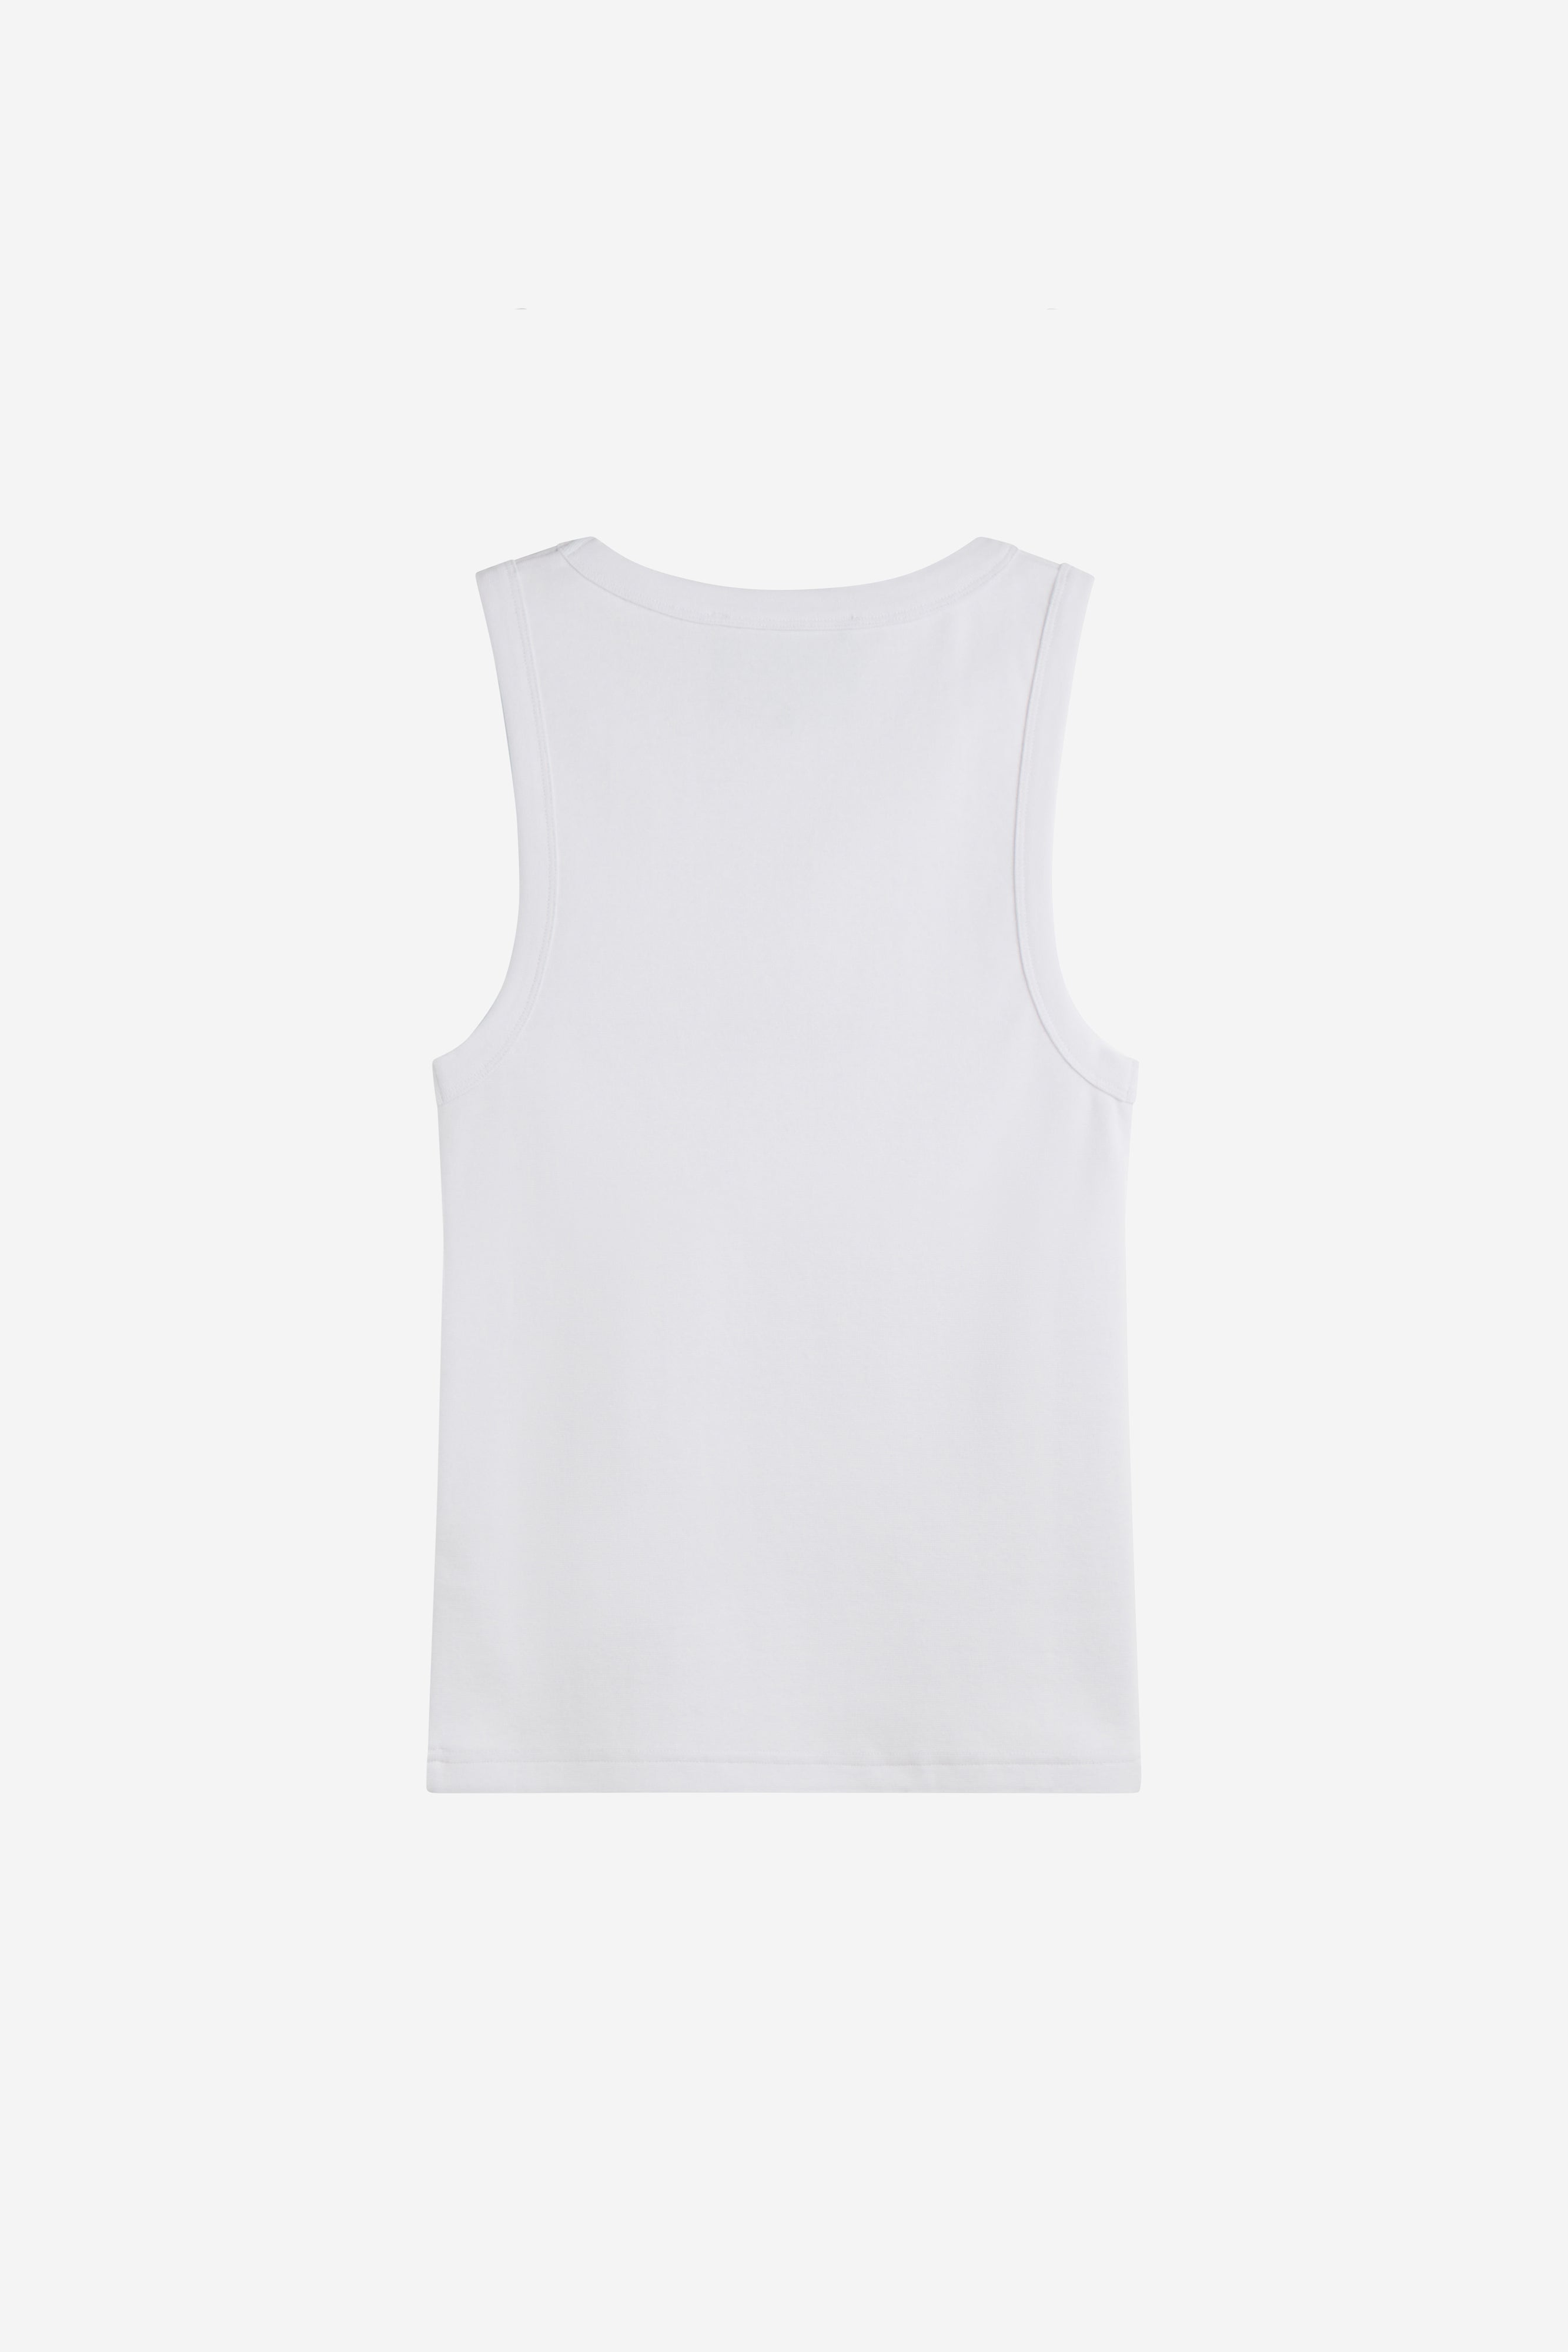 ALL-IN TANK WHITE